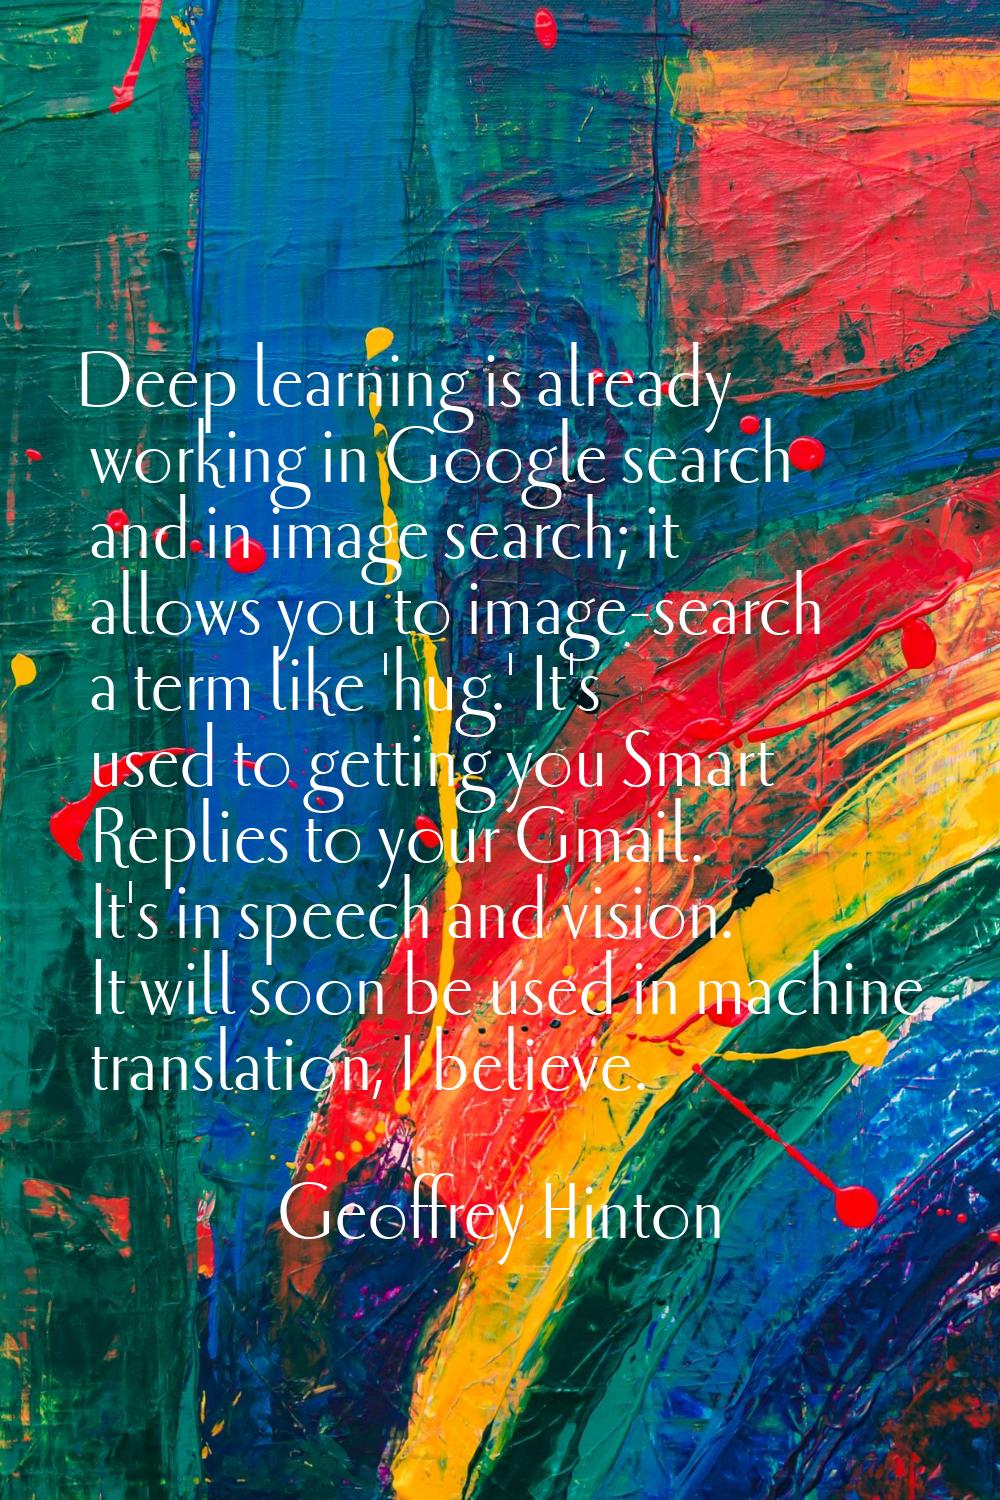 Deep learning is already working in Google search and in image search; it allows you to image-searc